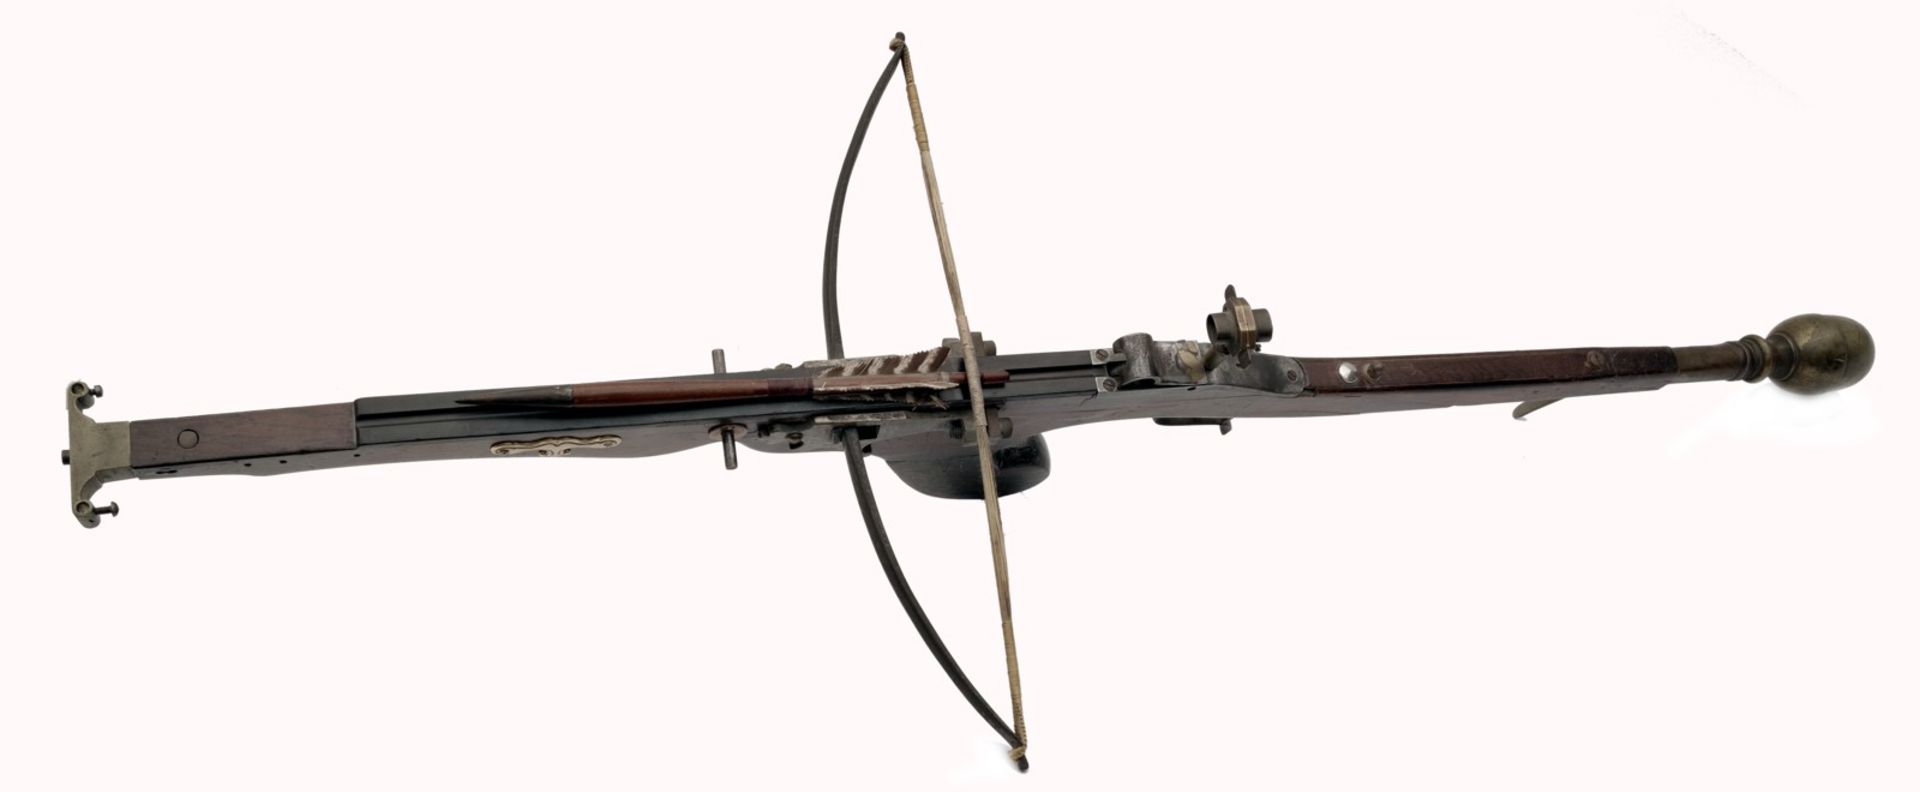 A Target Crossbow - Image 2 of 5